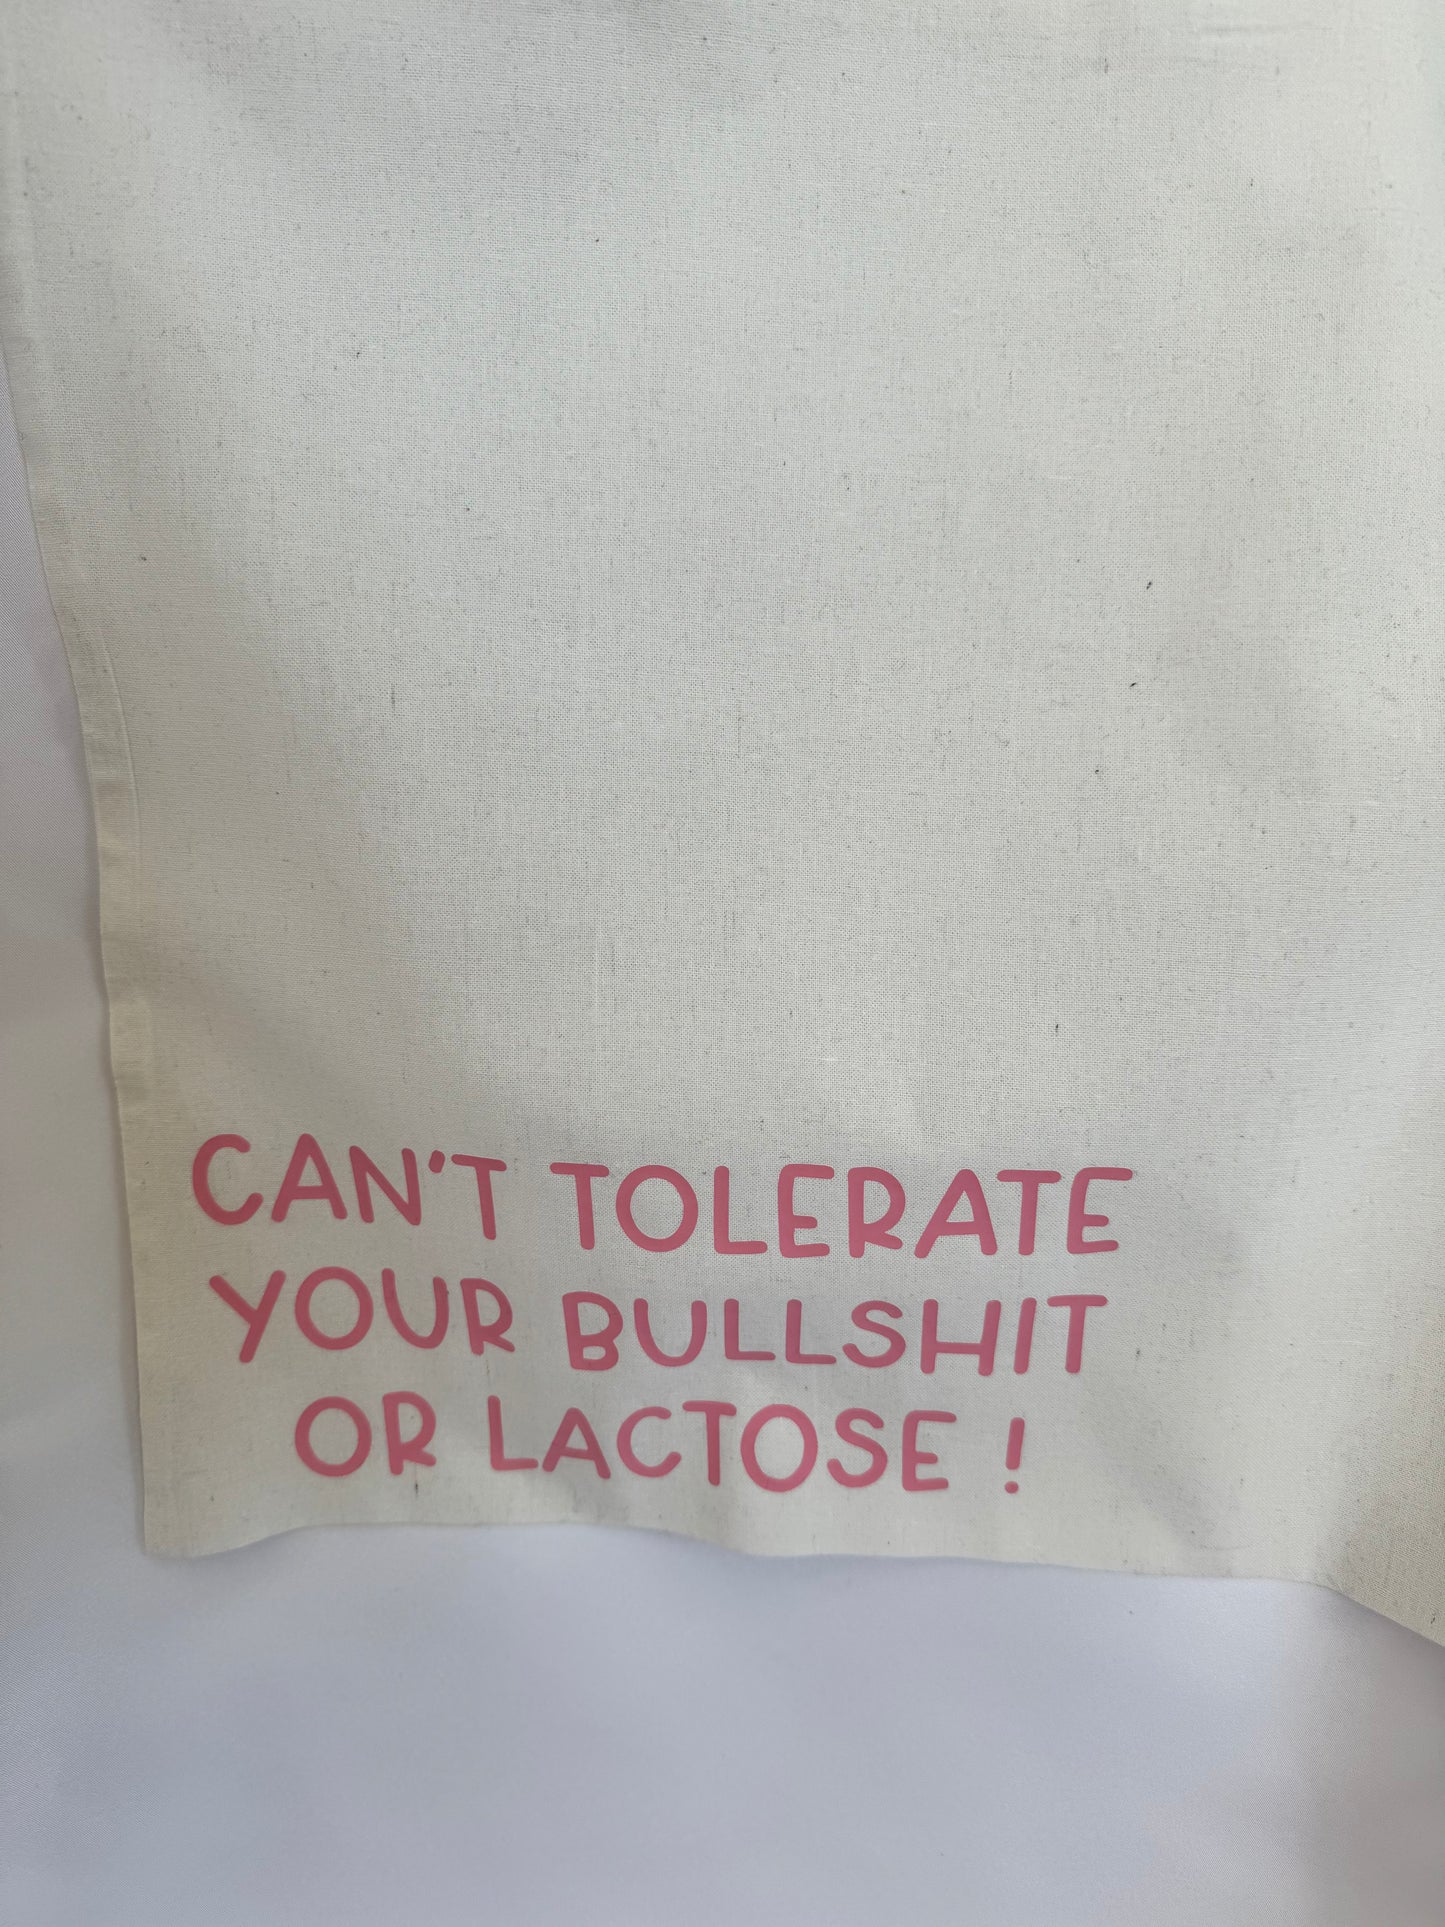 Can't Tolerate Your BullShit or Lactose Tote Bag